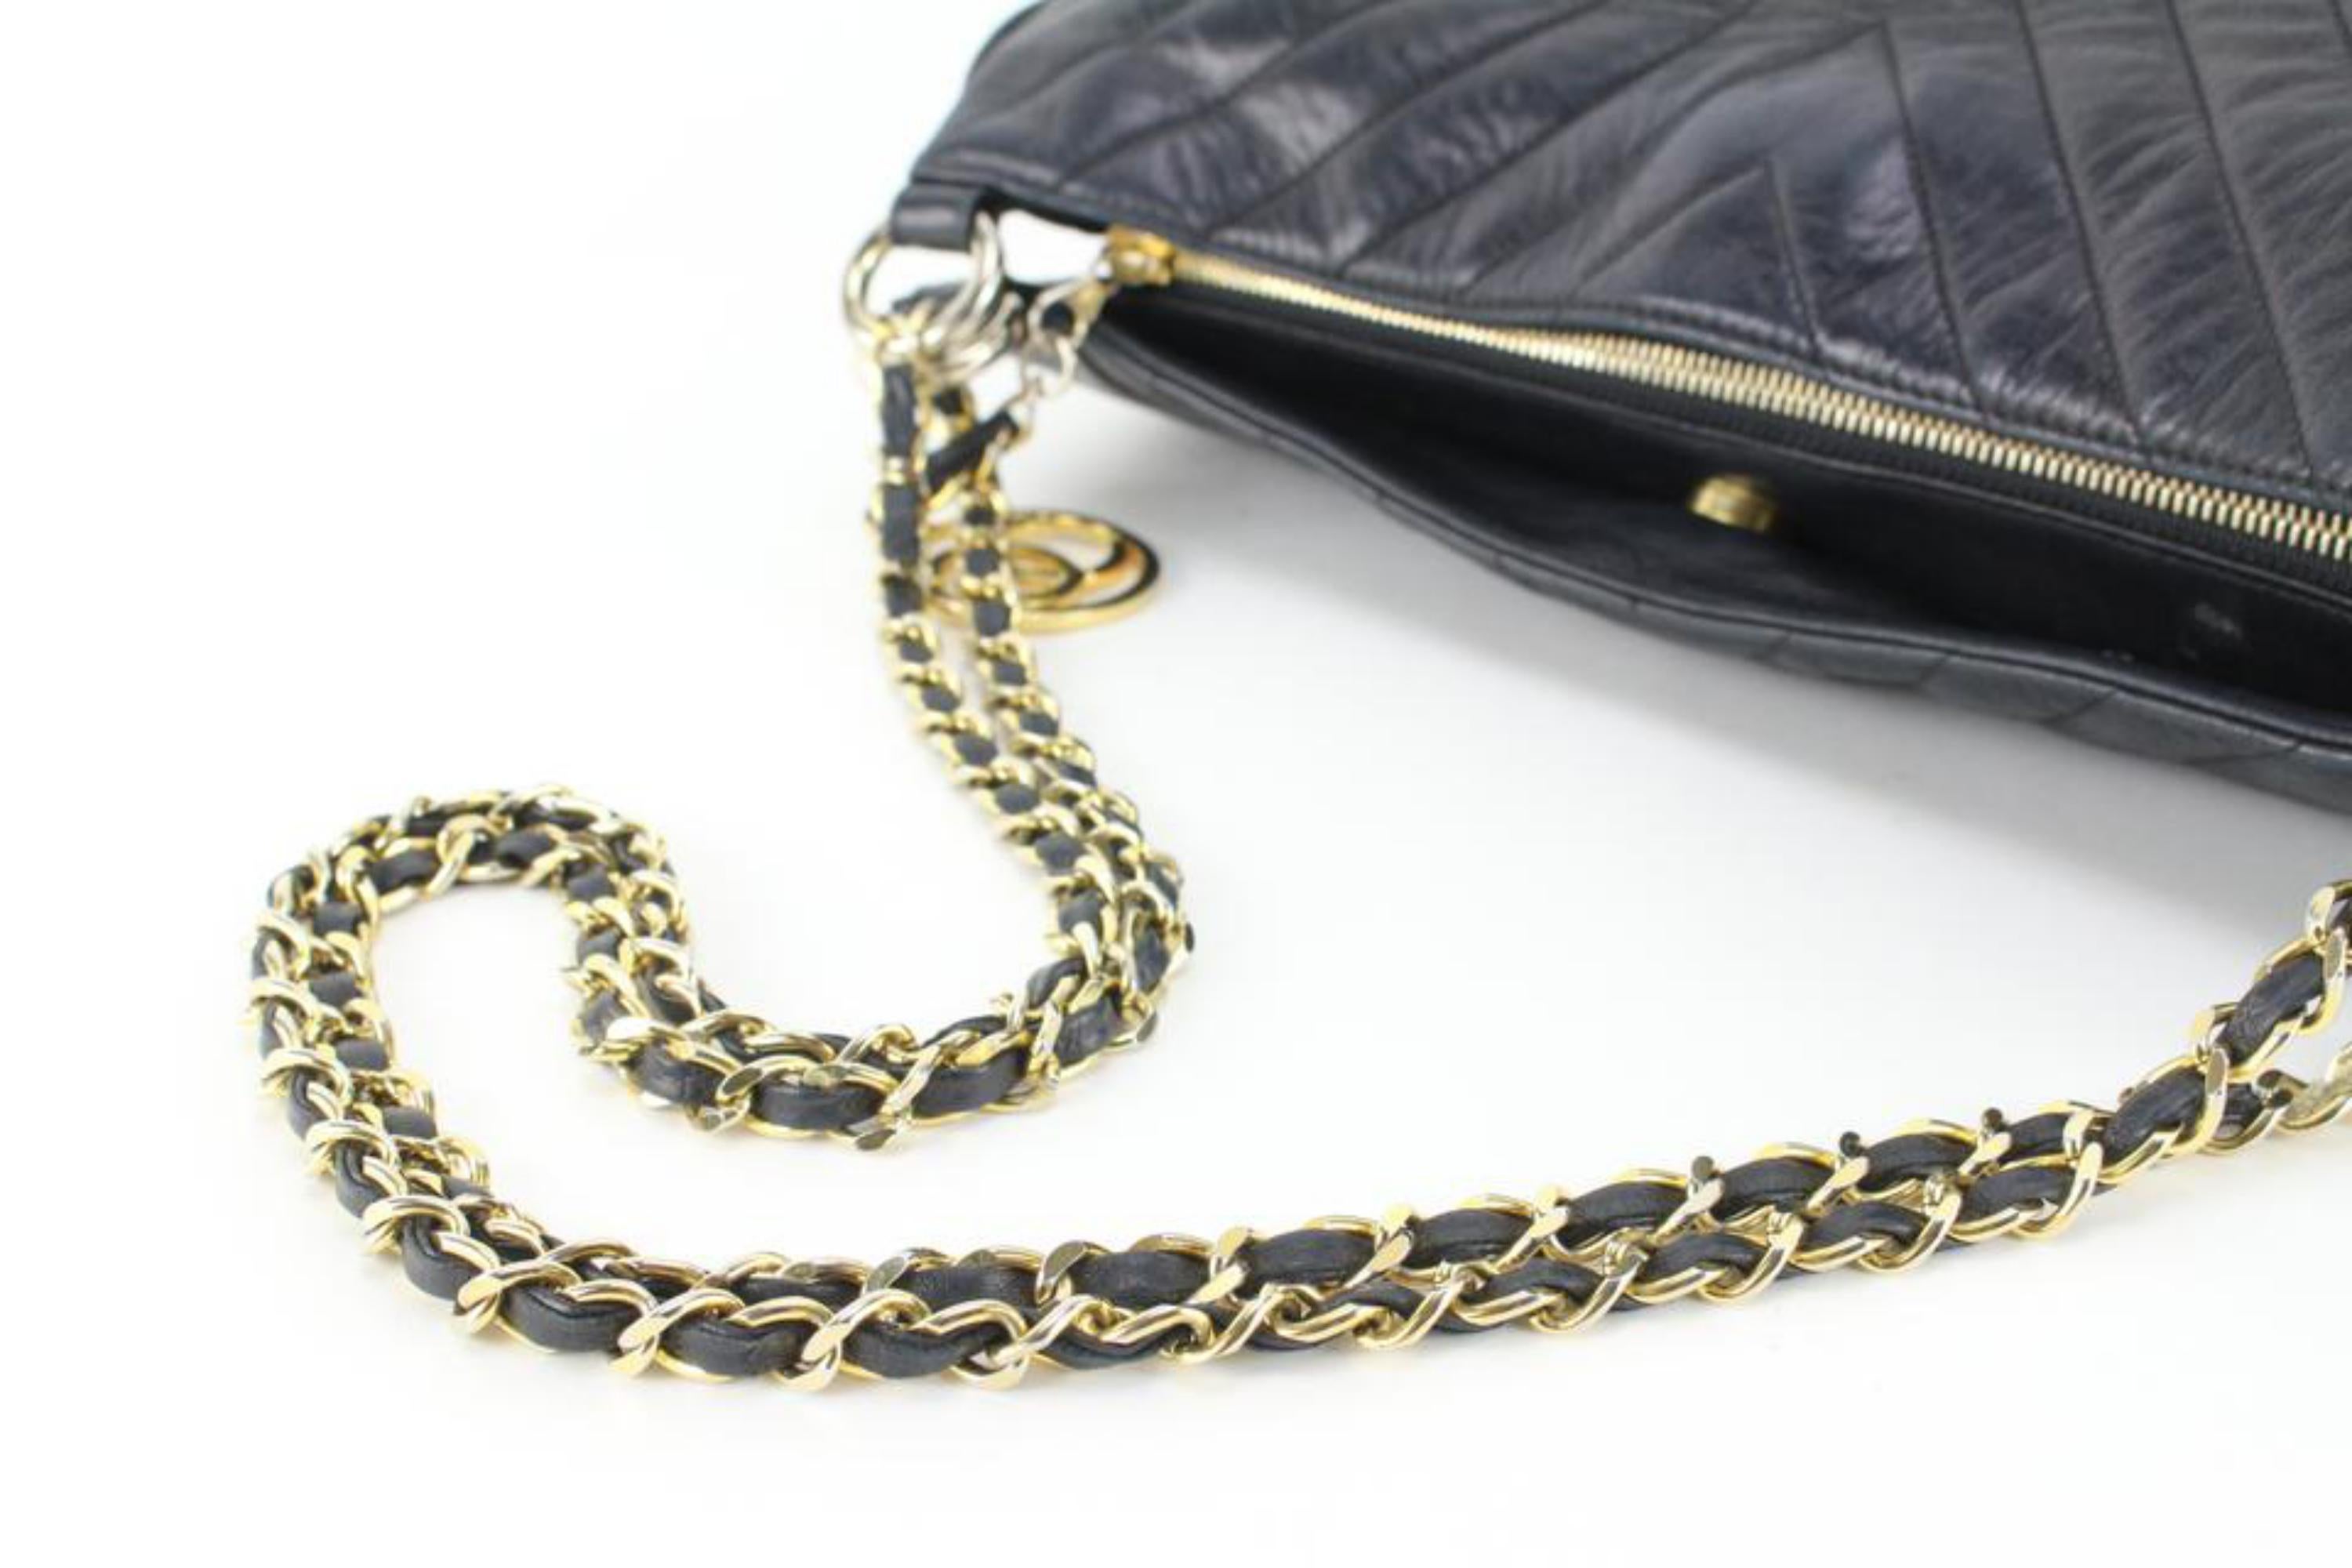 Chanel Quilted Chevron Lambskin Chain Shoulder Bag 60ck816s For Sale 4